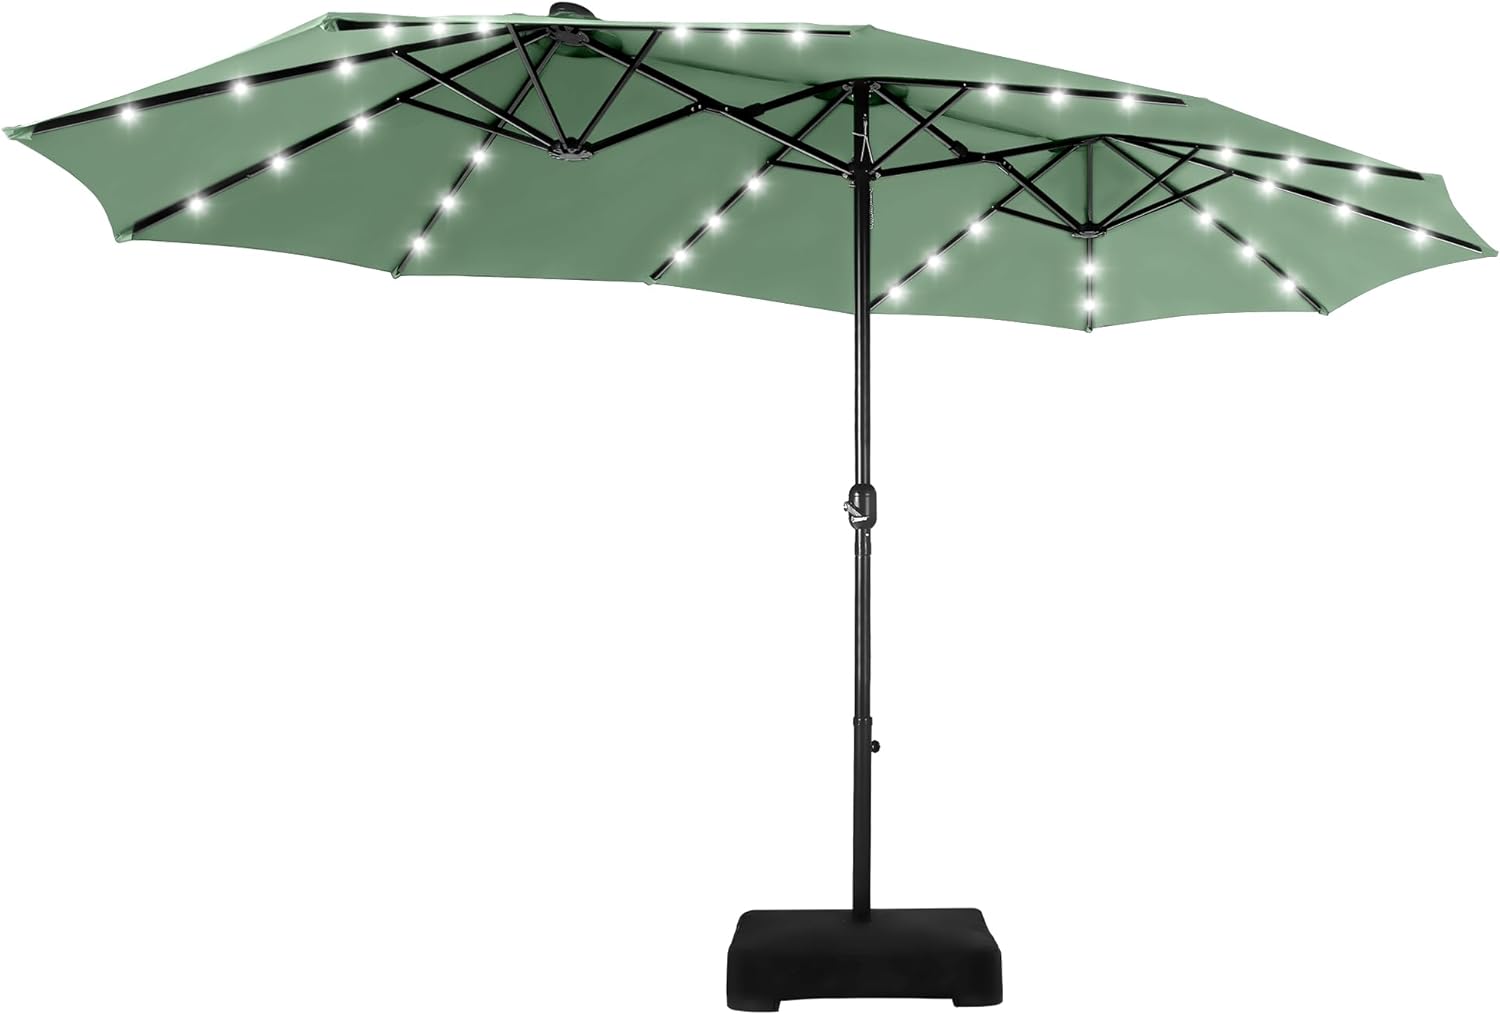 I searched a while looking for a good Patio Umbrella for my son and daughter in law out in Florida. We have nothing but good things to say about Modern - Furniture and this beautiful, sturdy, well made umbrella. They had an unfortunate incident where the high winds came too quick for them to get outside to save the umbrella so it suffered some breakage, and it was not the company' fault. My children went looking to try and find one near their home but the prices were too high and the umbrellas 